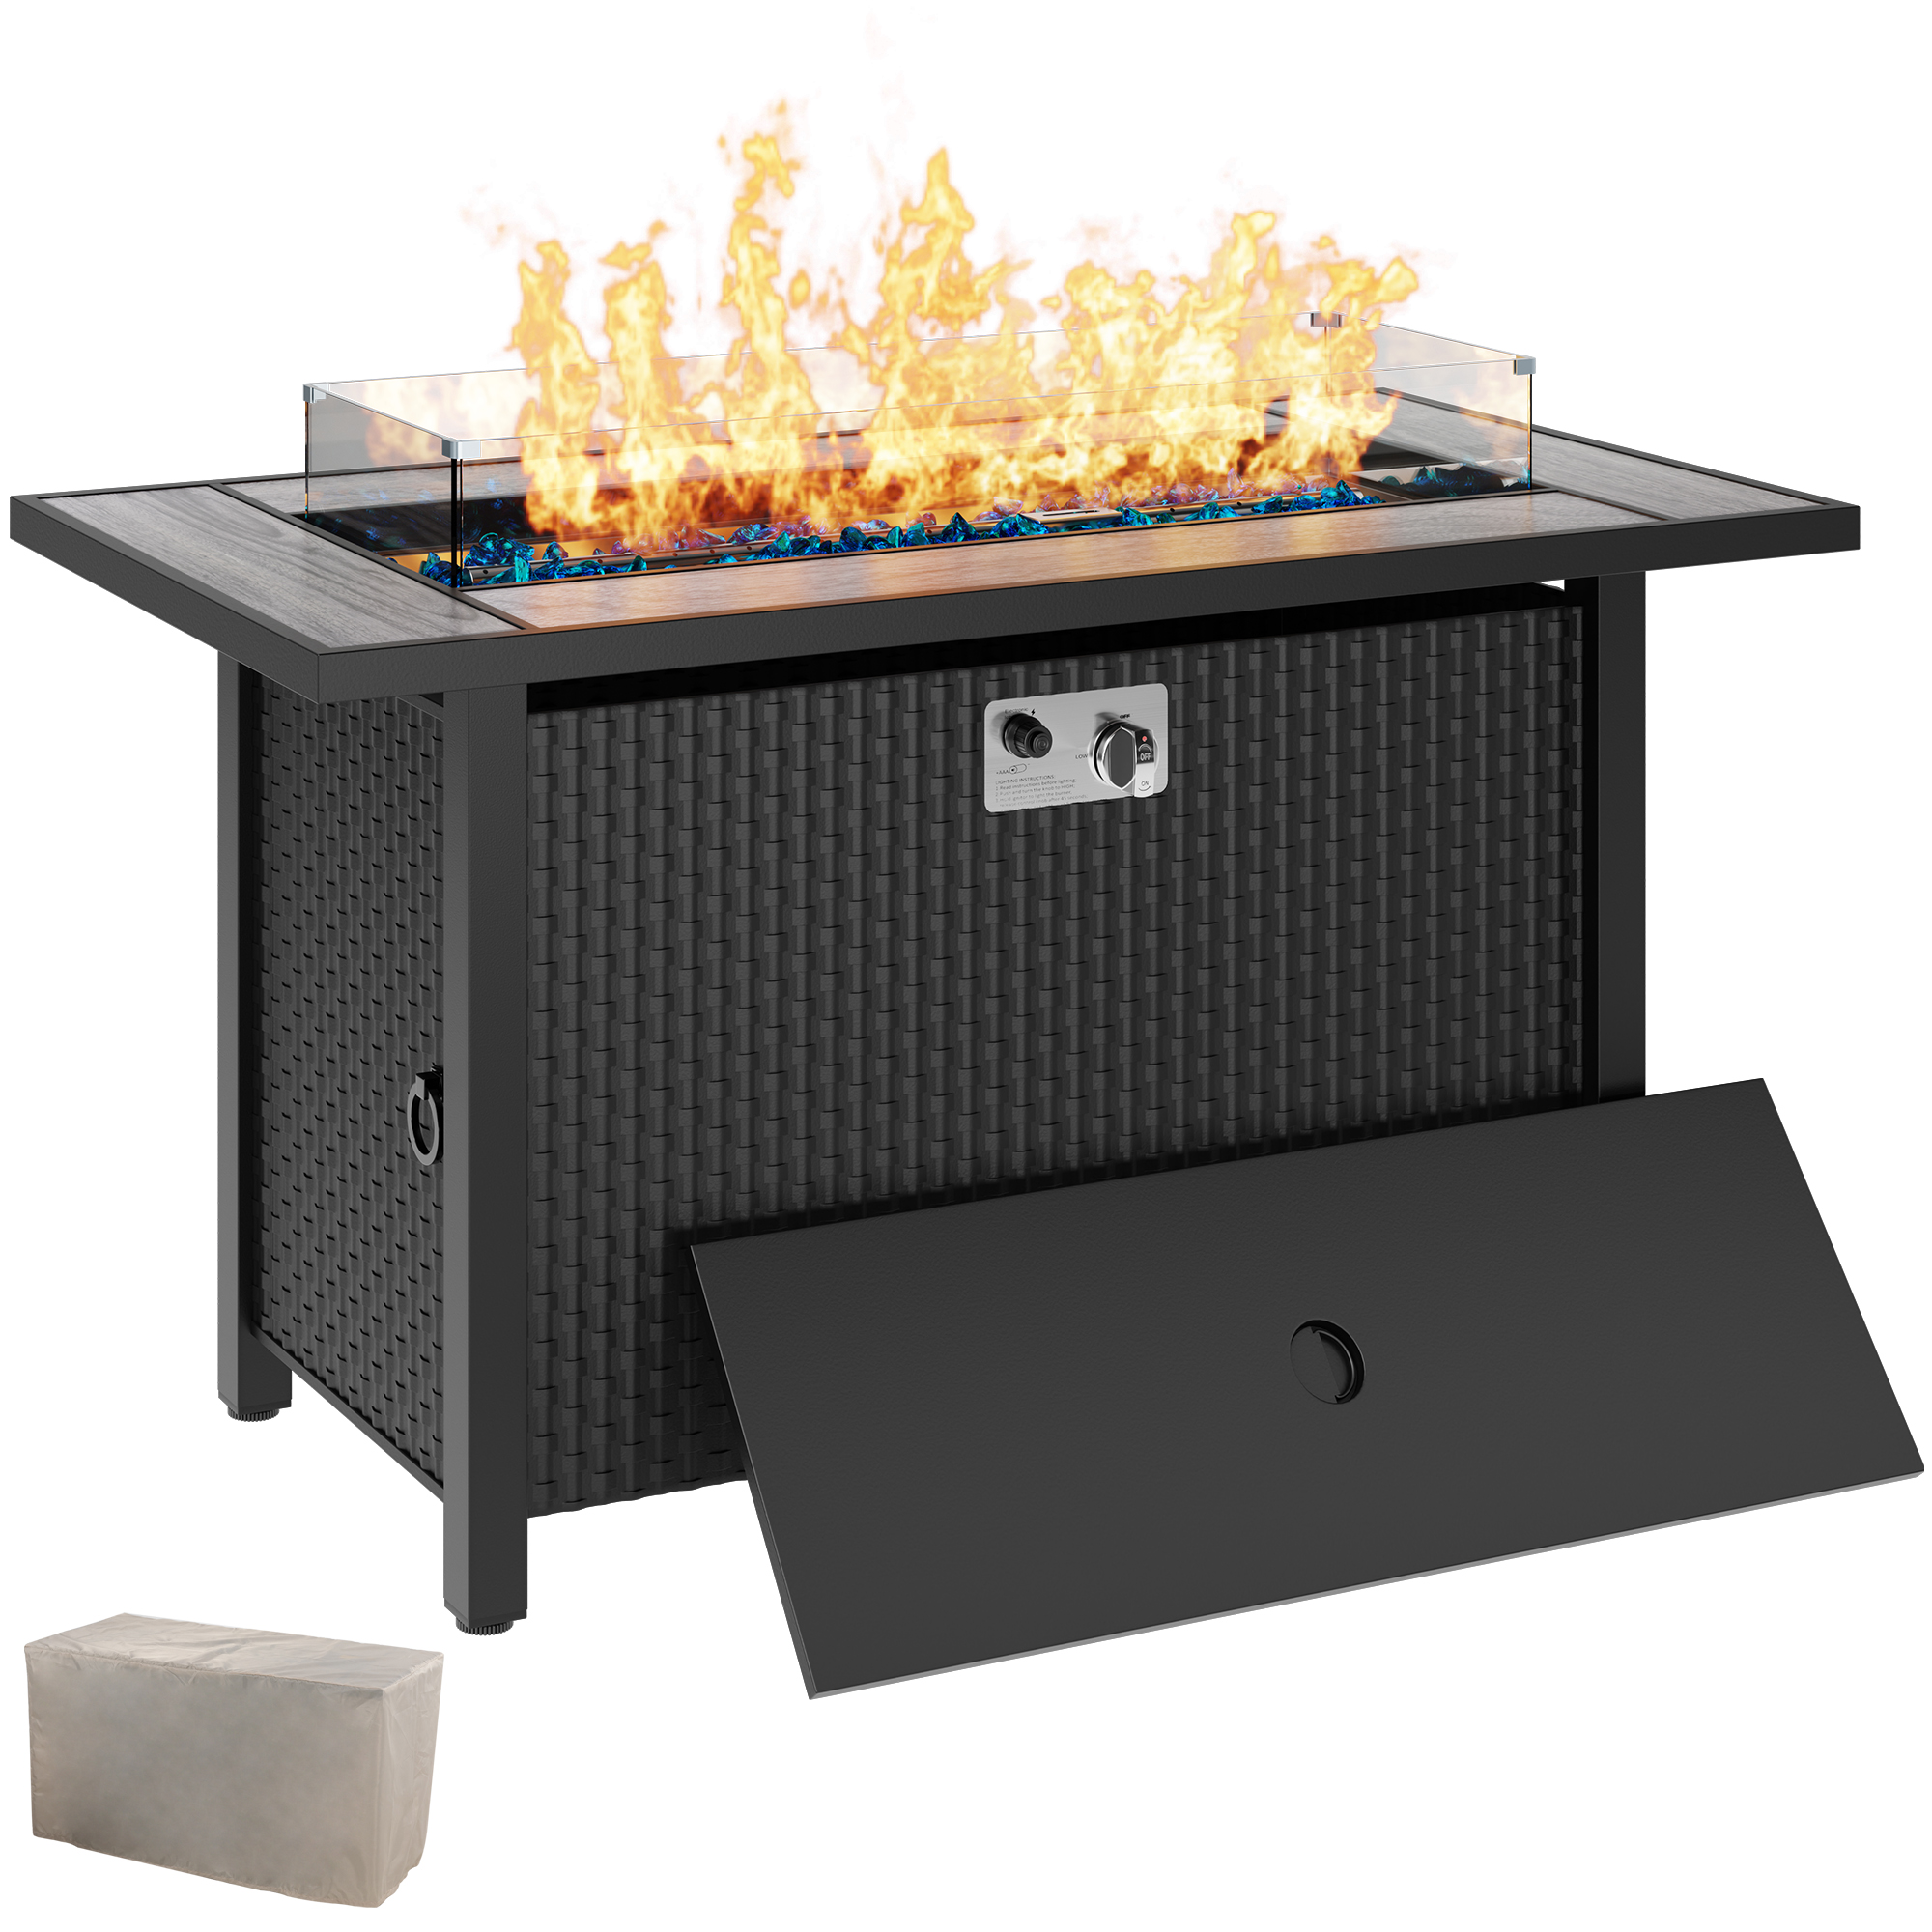 Walsunny 45" Propane Fire Pit Table 50,000 BTU Steel Gas Fire Pit with Removable Lid & Waterproof Cover and Tables - image 1 of 9